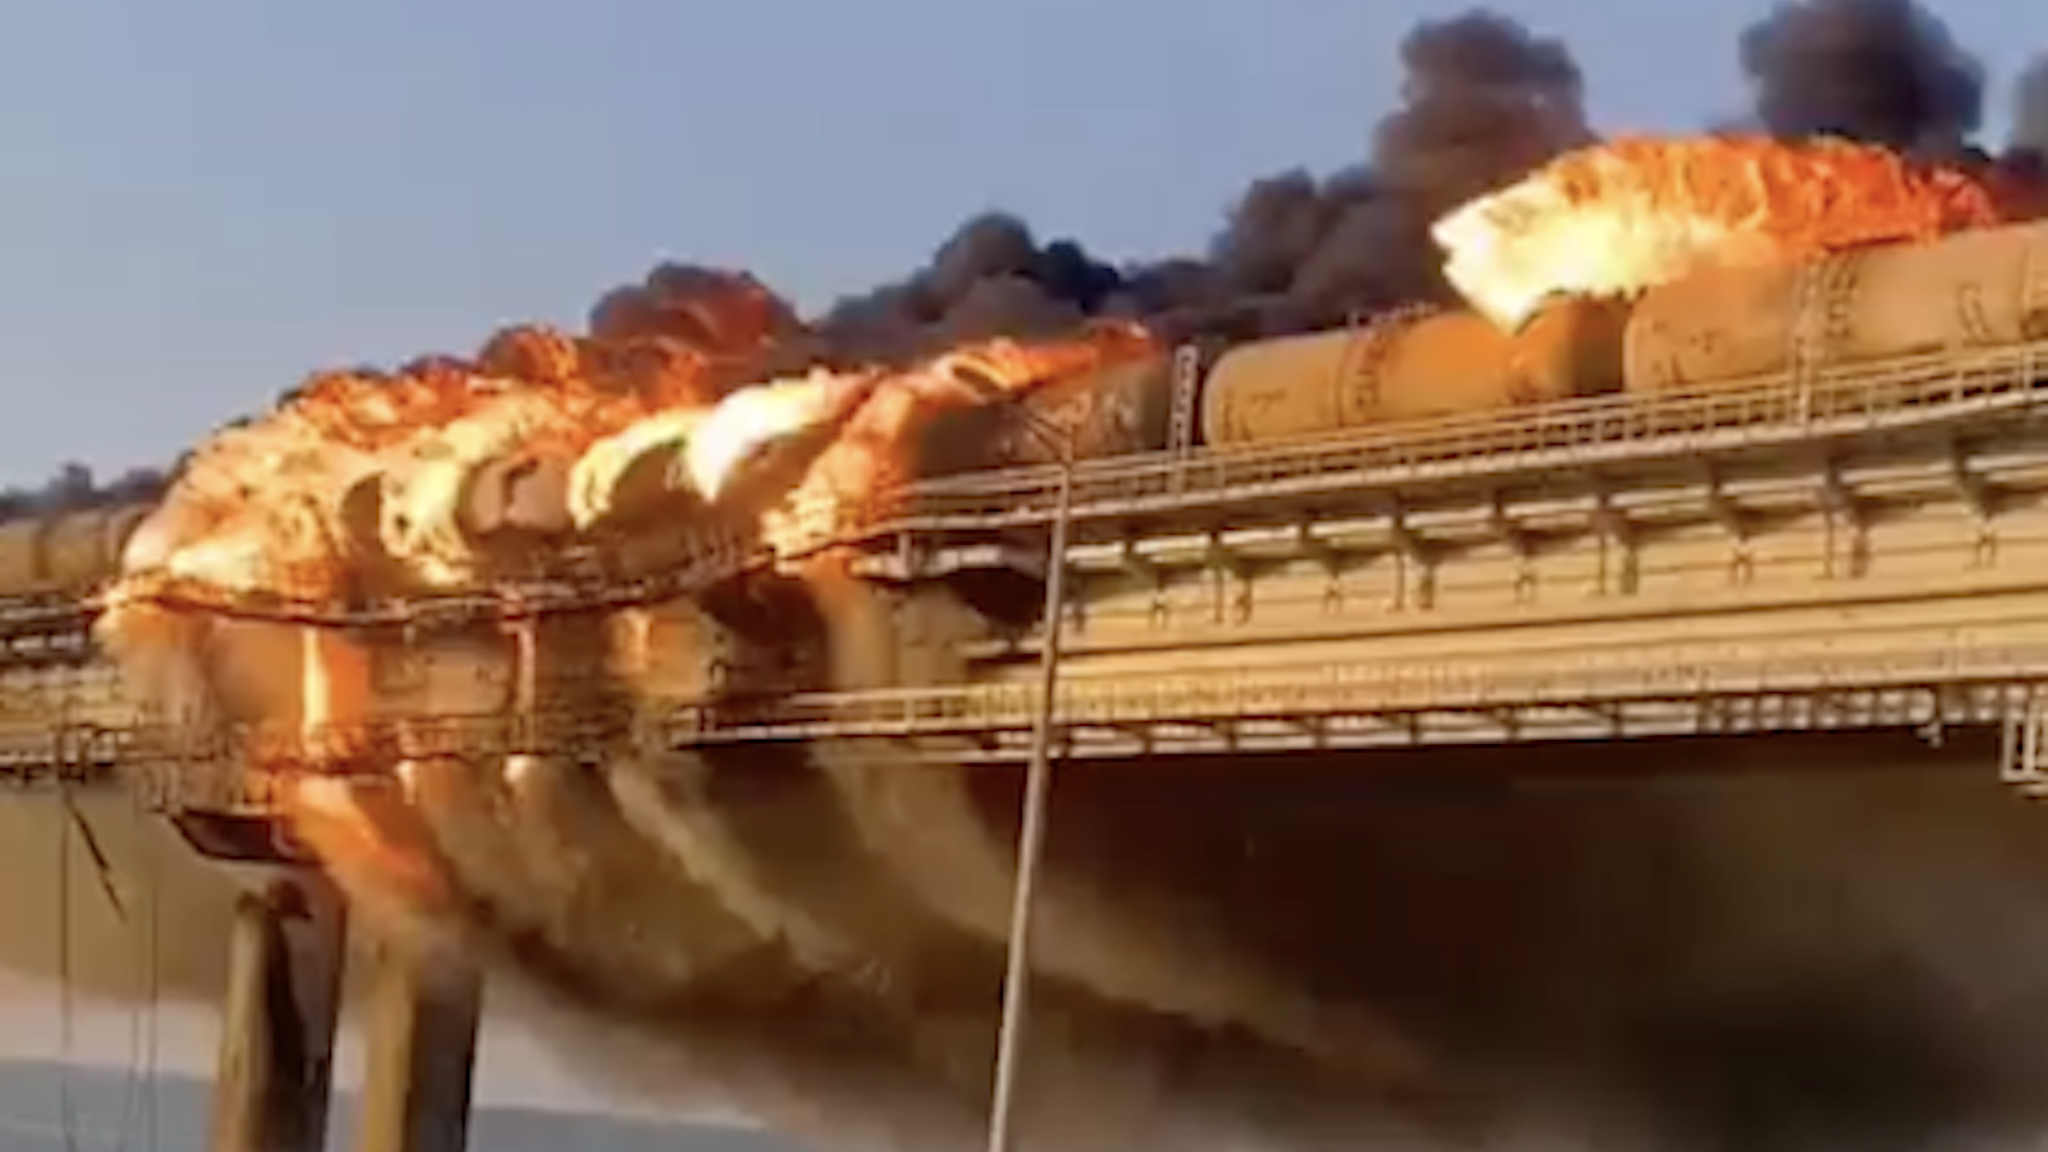 The Kerch bridge, which joins the annexed Russian peninsula to Russia, is Europe’s longest bridge. Reports said a fuel tank exploded on the strategically important bridge, and social media images showed the tanker in flames and part of the roadway had fallen into the Sea of Azov.